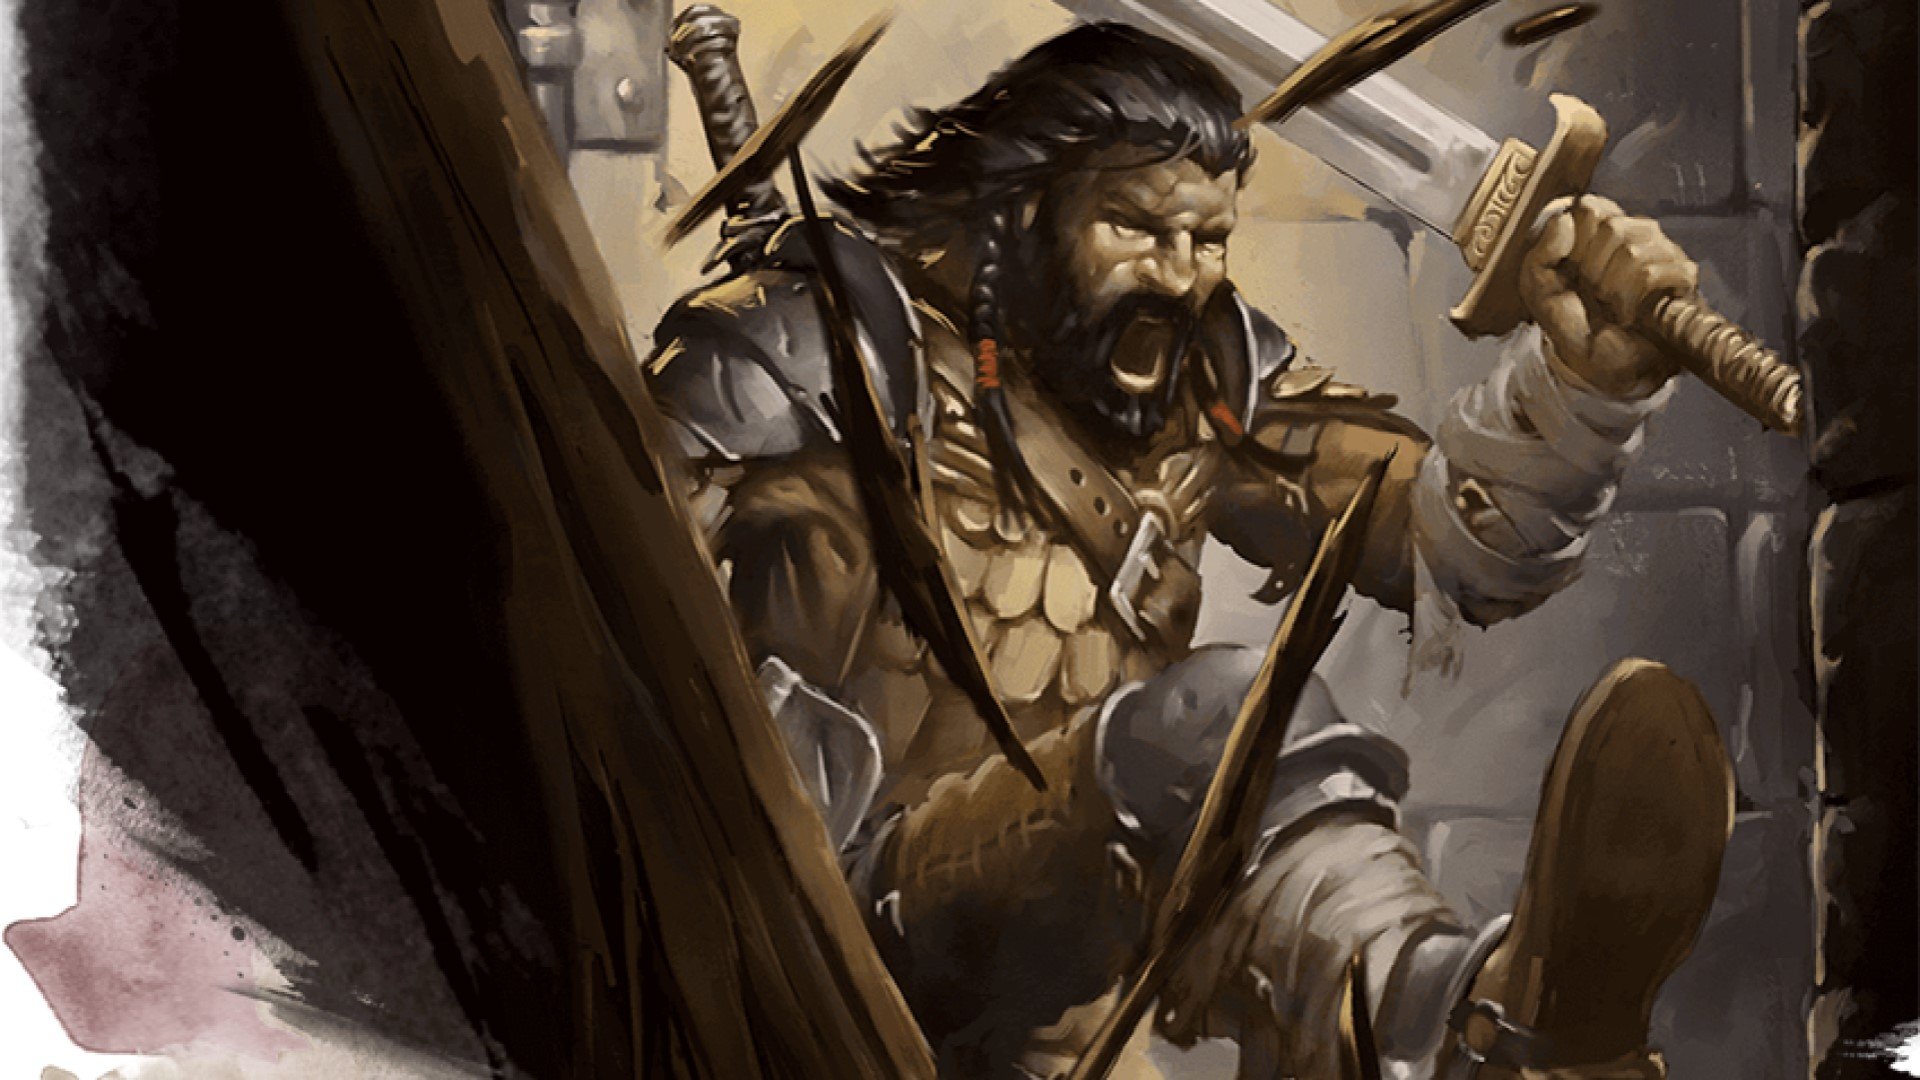 DnD Barbarian 5E class guide - Wizards of the Coast artwork showing a human barbarian kicking in a door